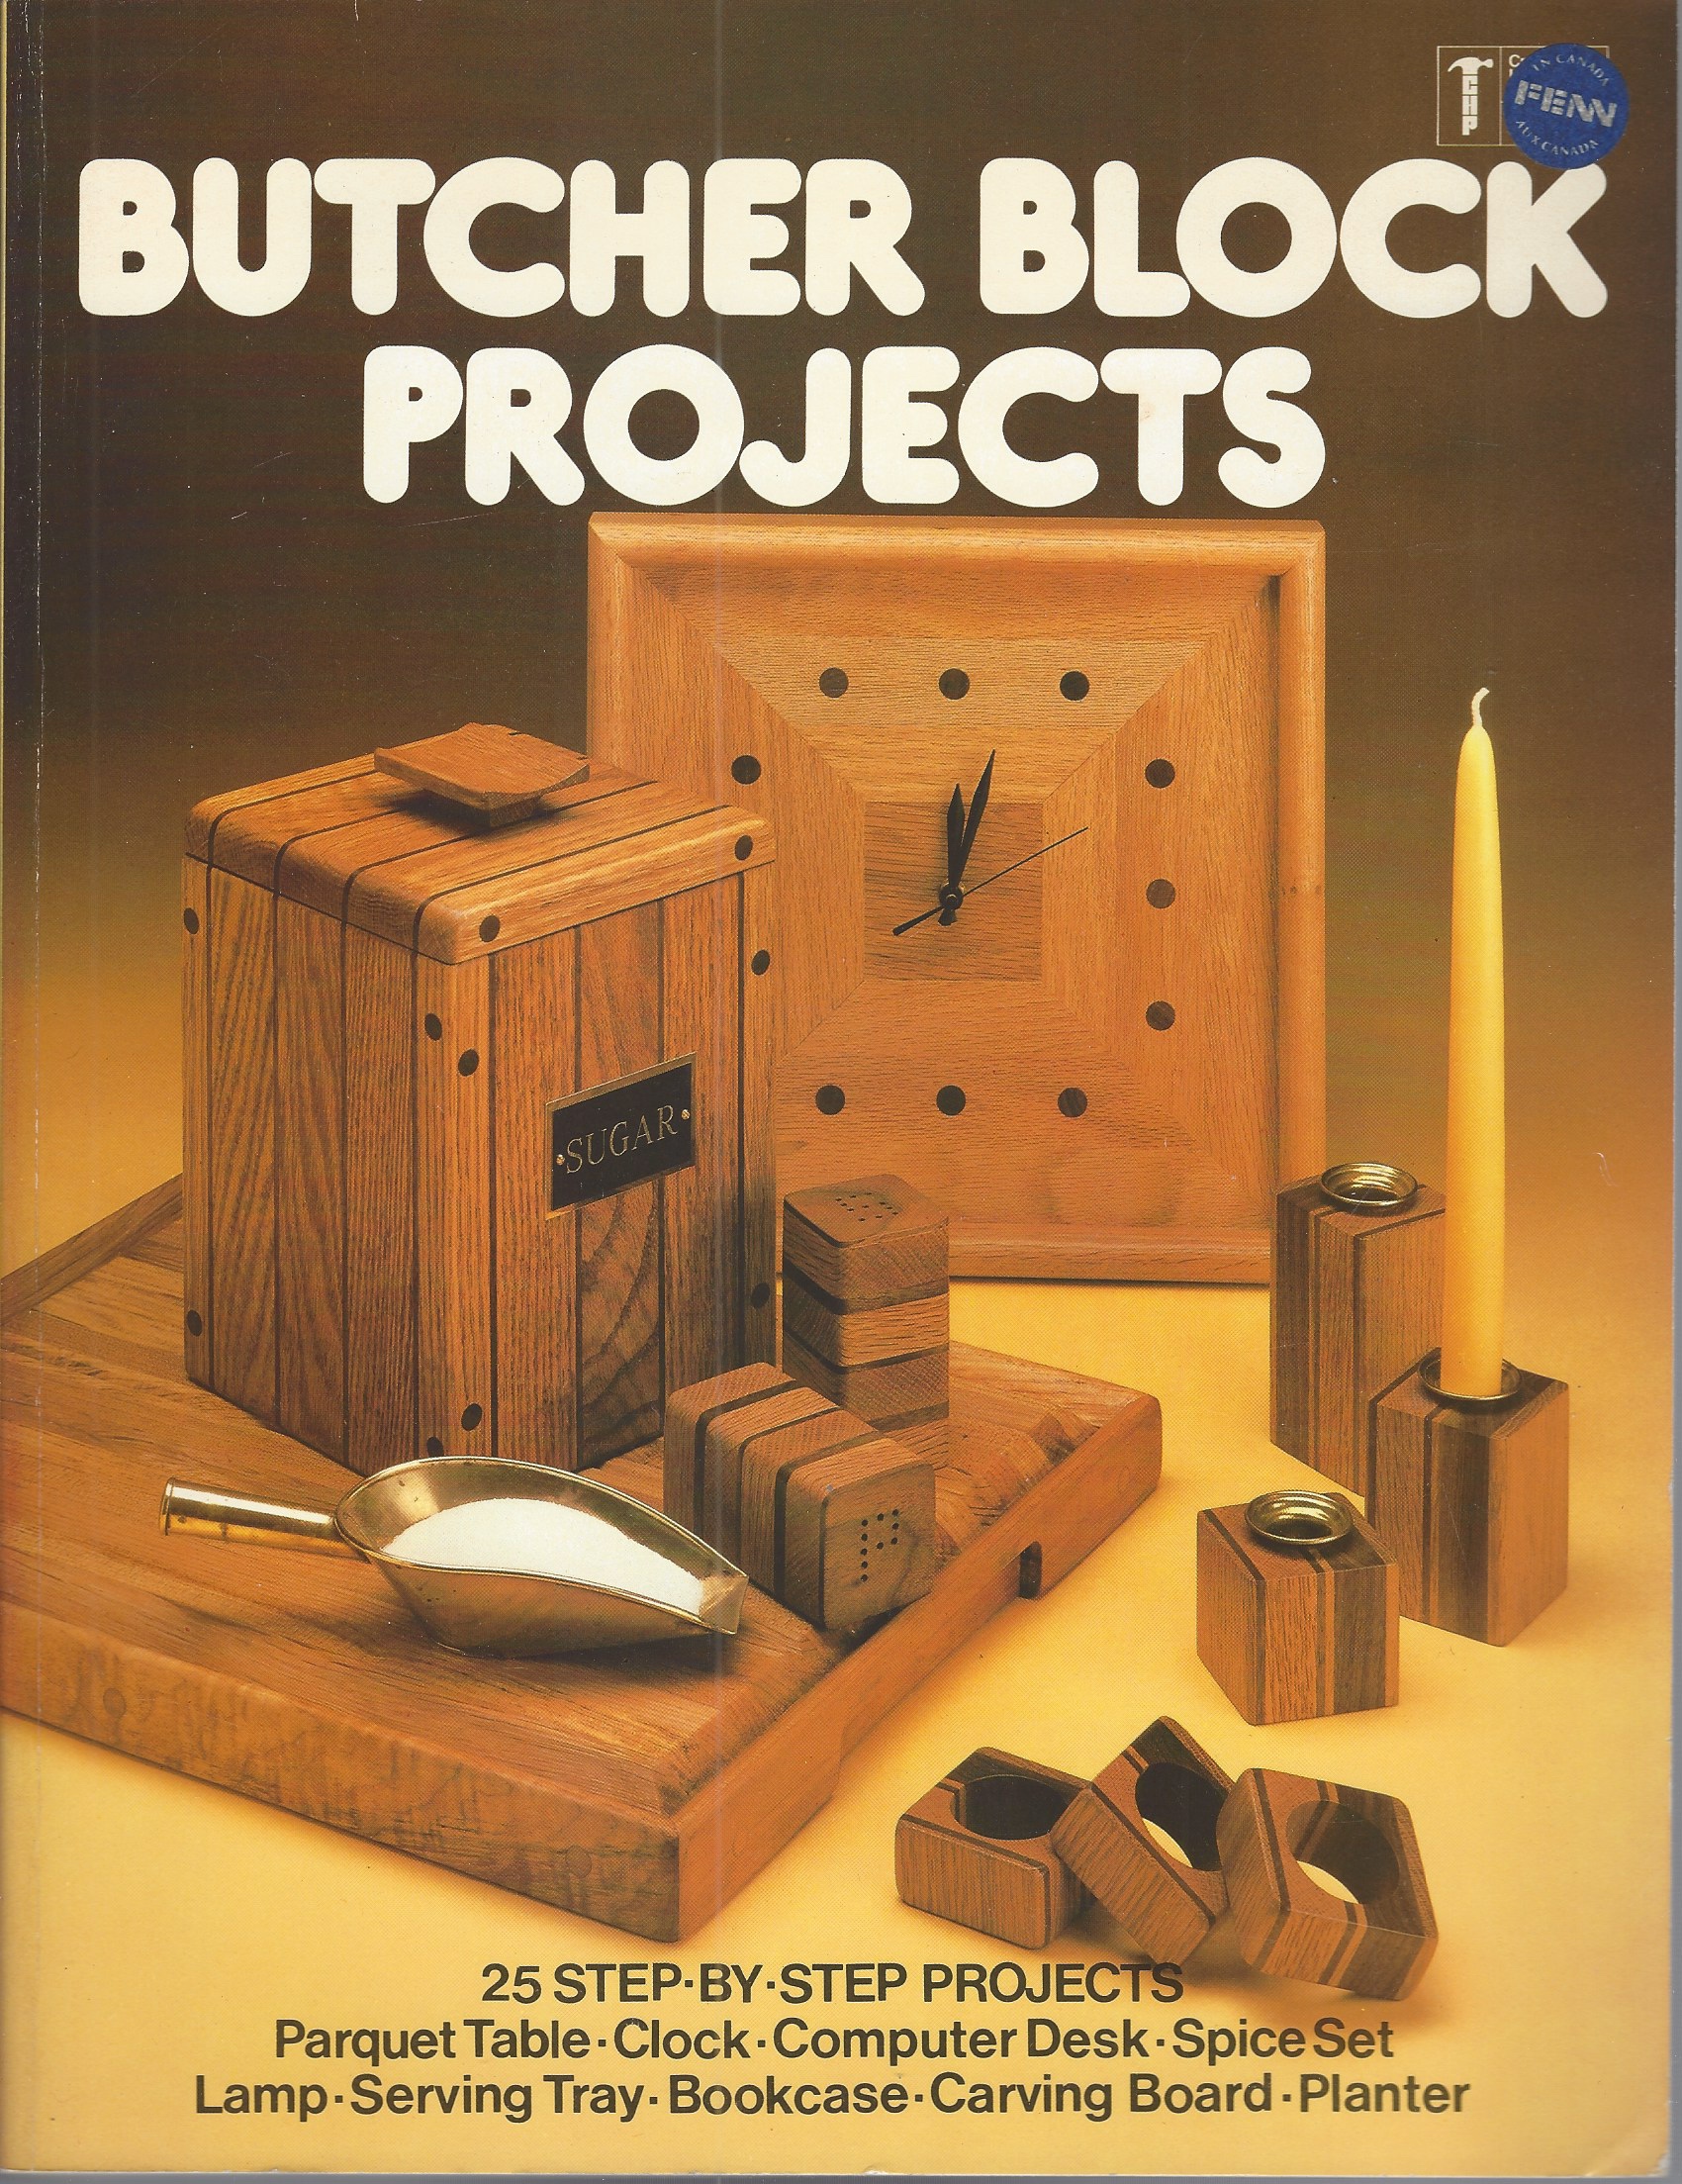 OBERRECHT KENN - Butcher Block Projects: 25 Step-by-Step Projects